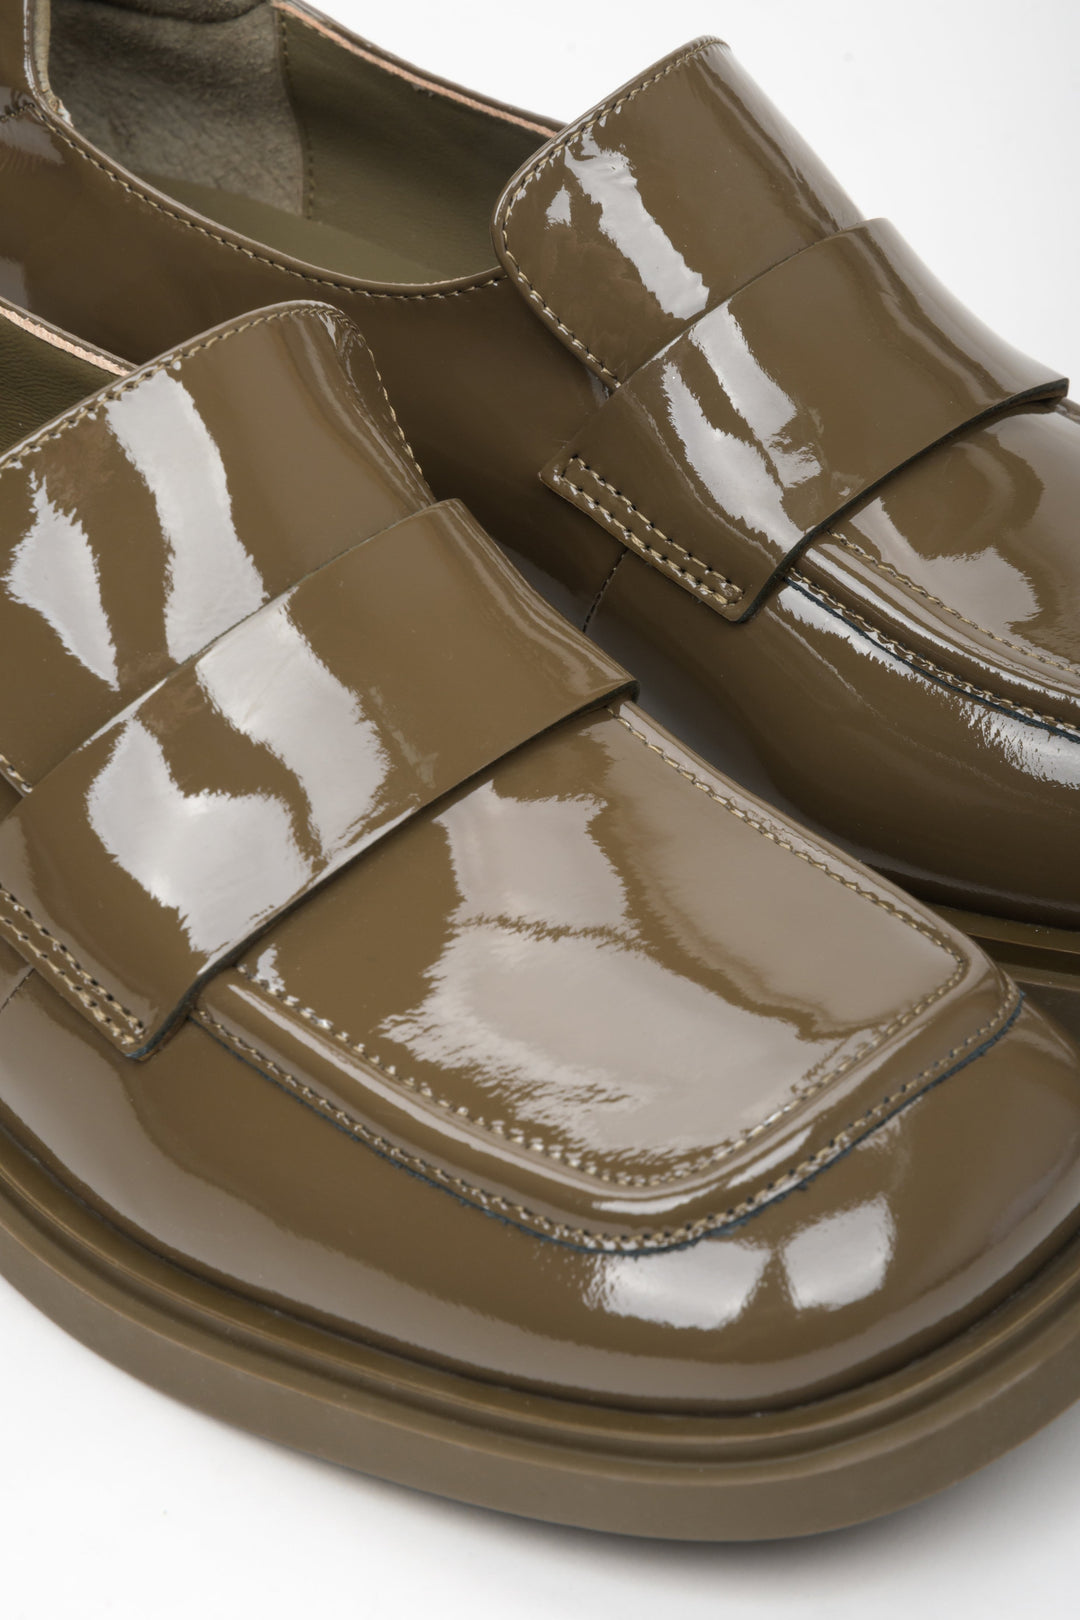 Women's dark green patent leather moccasins by Estro - close-up on details.